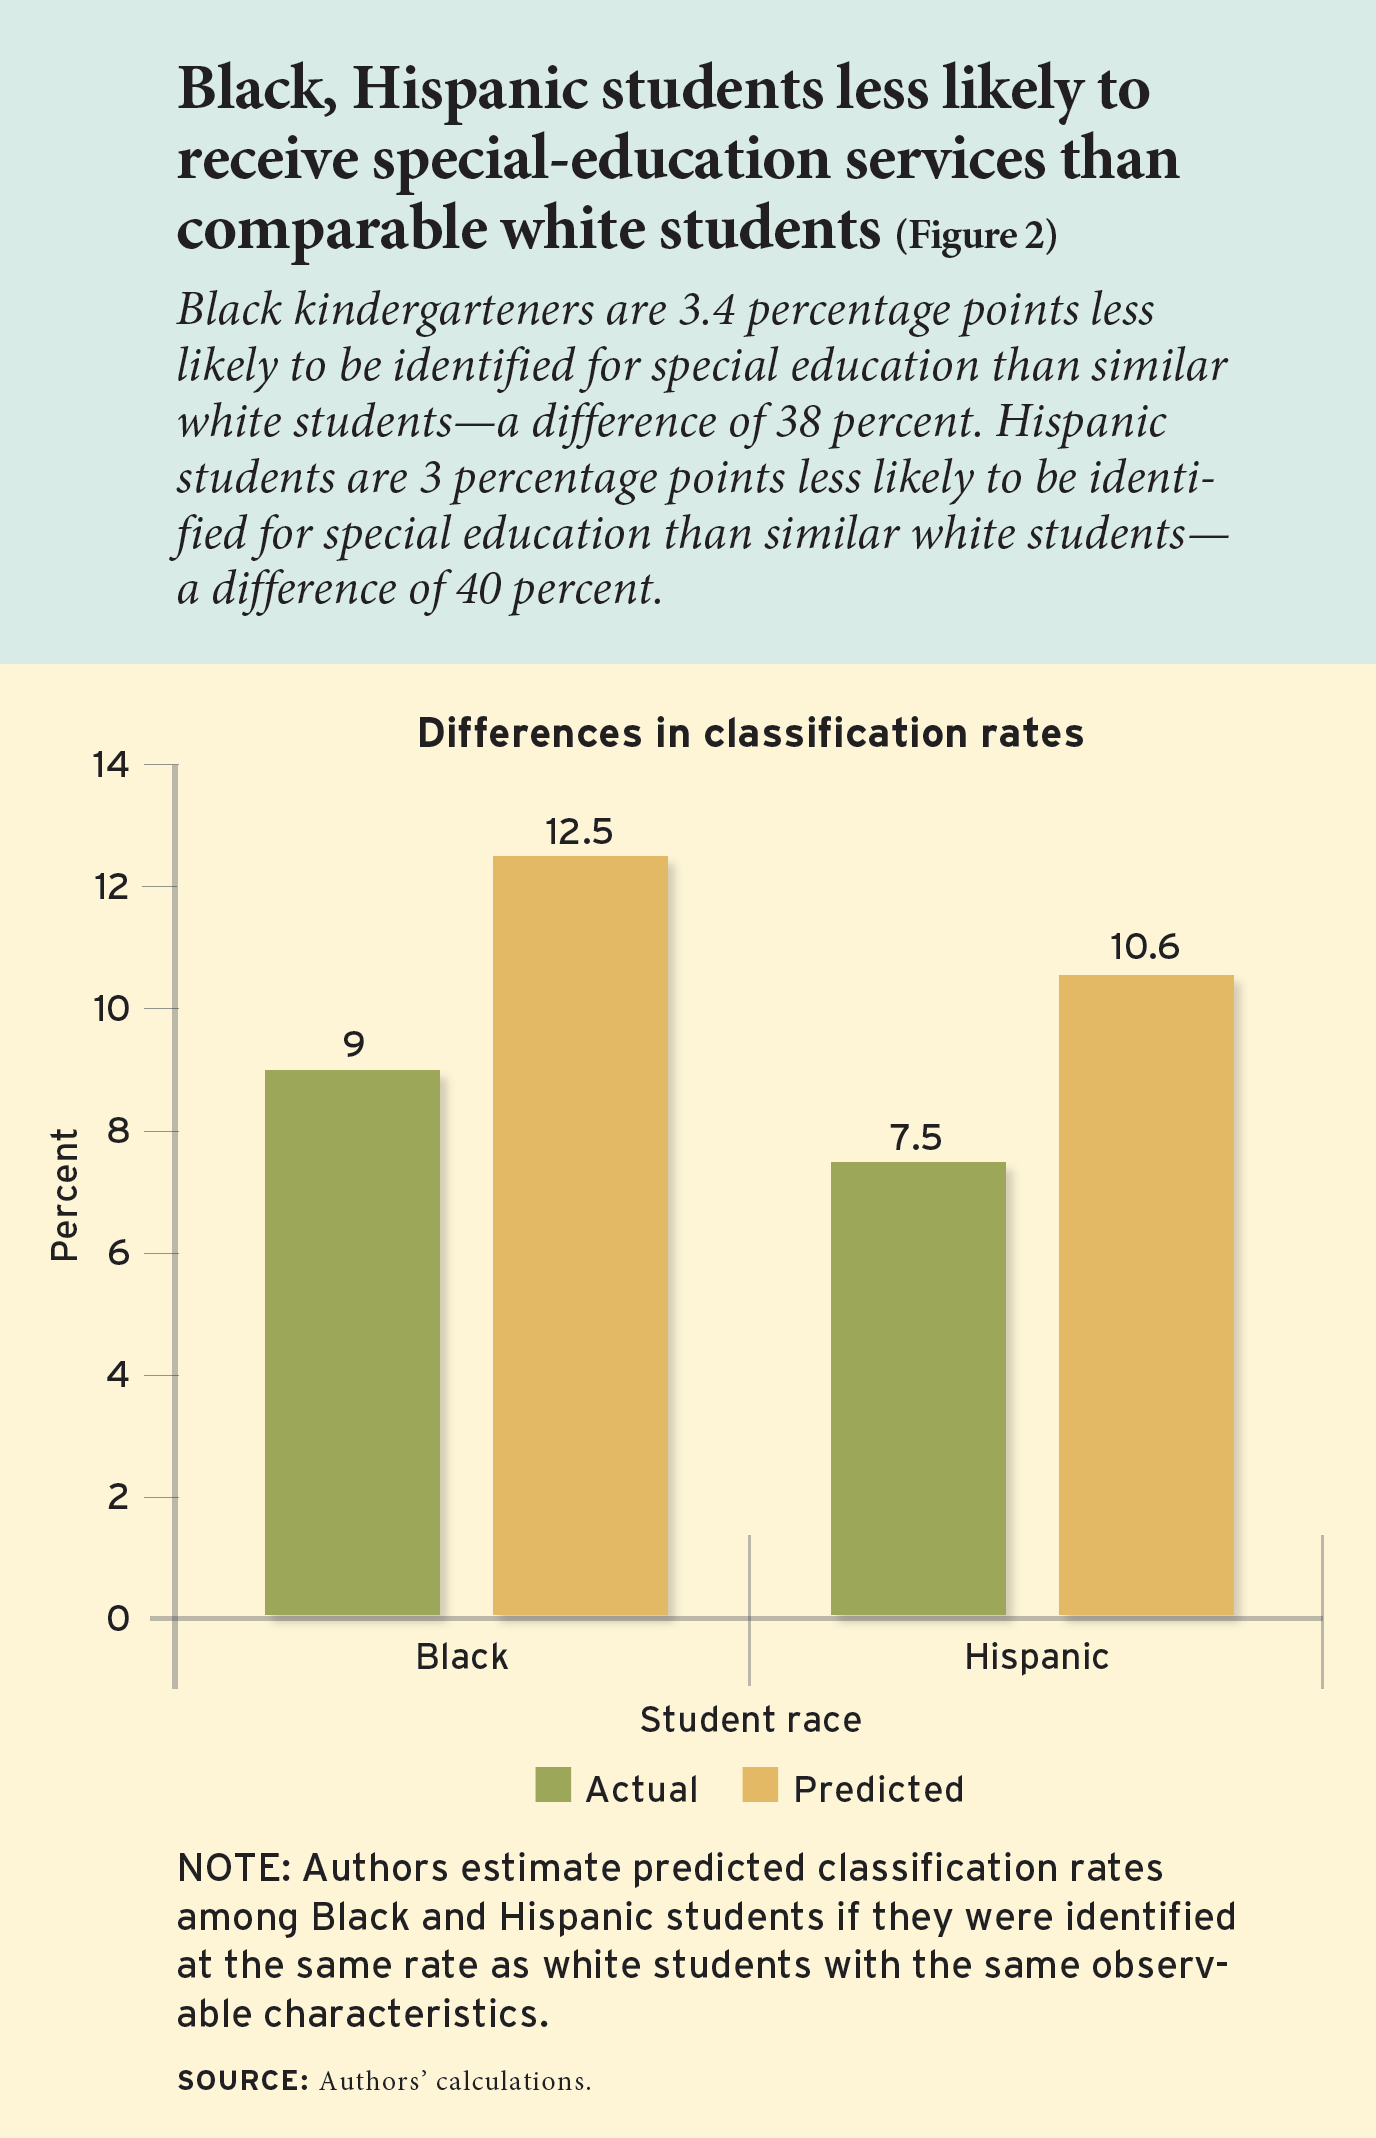 Black, Hispanic students less likely to receive special-education services than
comparable white students. Black kindergarteners are 3.4 percentage points less likely to be identified for special education than similar white students—a difference of 38 percent. Hispanic students are 3 percentage points less likely to be identified for special education than similar white students—a difference of 40 percent.